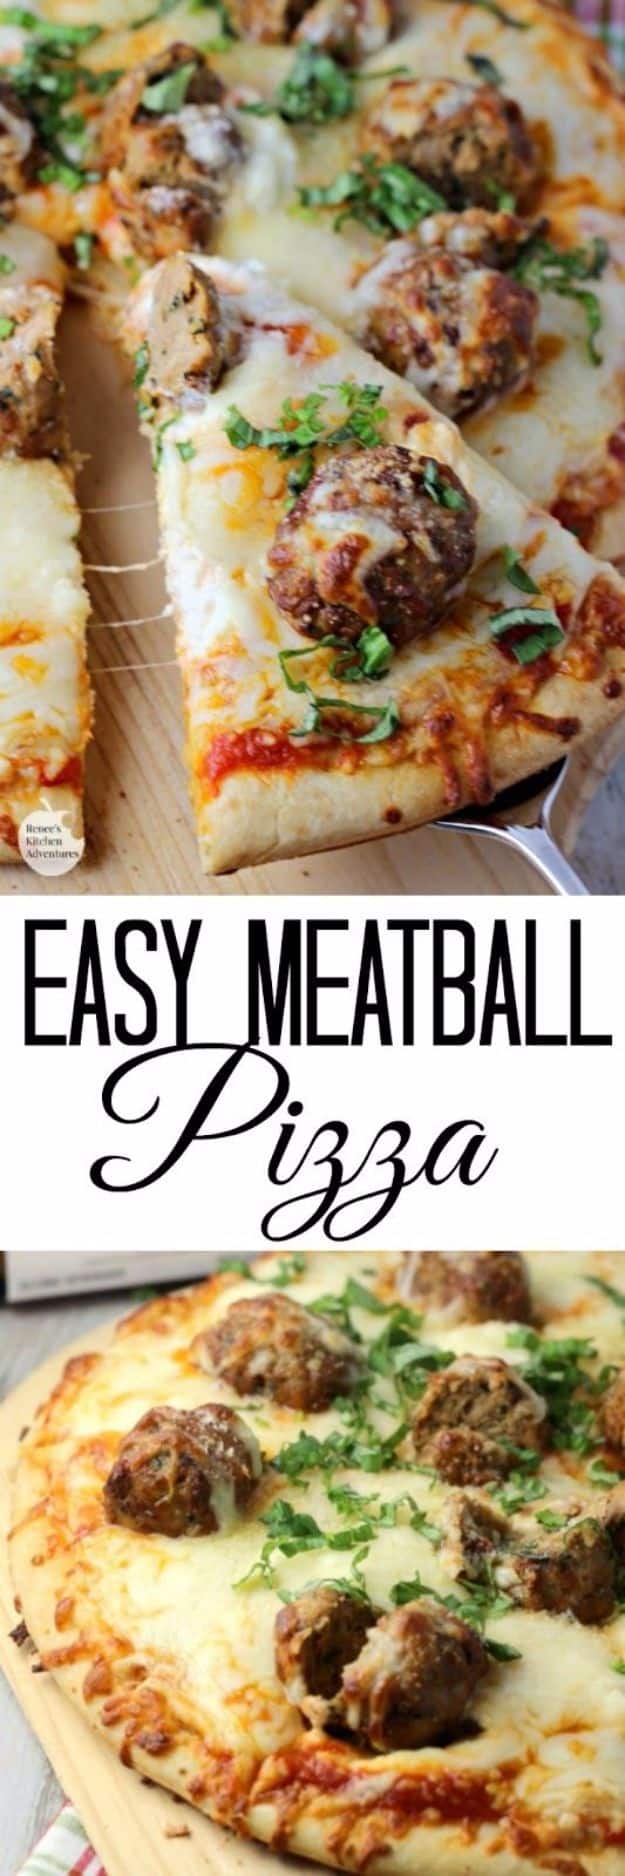 Best Pizza Recipes - Easy Meatball Pizza - Homemade Pizza Recipe Ideas for Healthy, Easy Dinner, Lunch and Snacks - How To Make Pizza Dough at Home - Step by Step Tutorials for Varieties with Pepperoni, Gourmet and Unique Tips With Pillsbury Biscuits, for Kids, With Chicken and French Bread - Thin Crust and Deep Dish Pizzas #pizza #recipes